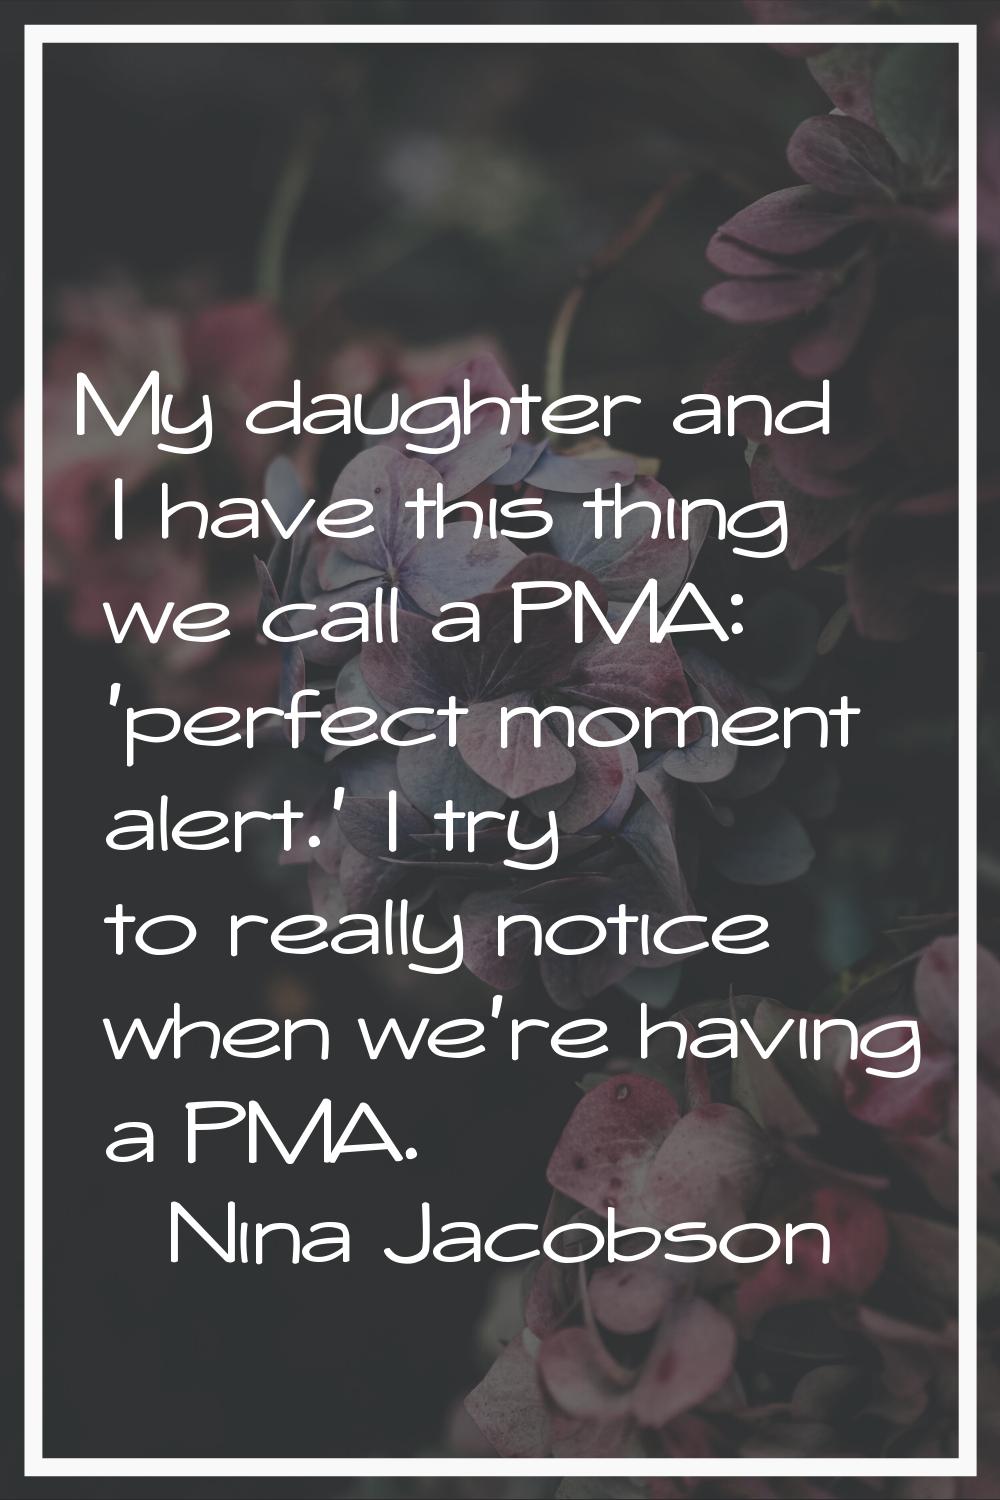 My daughter and I have this thing we call a PMA: 'perfect moment alert.' I try to really notice whe